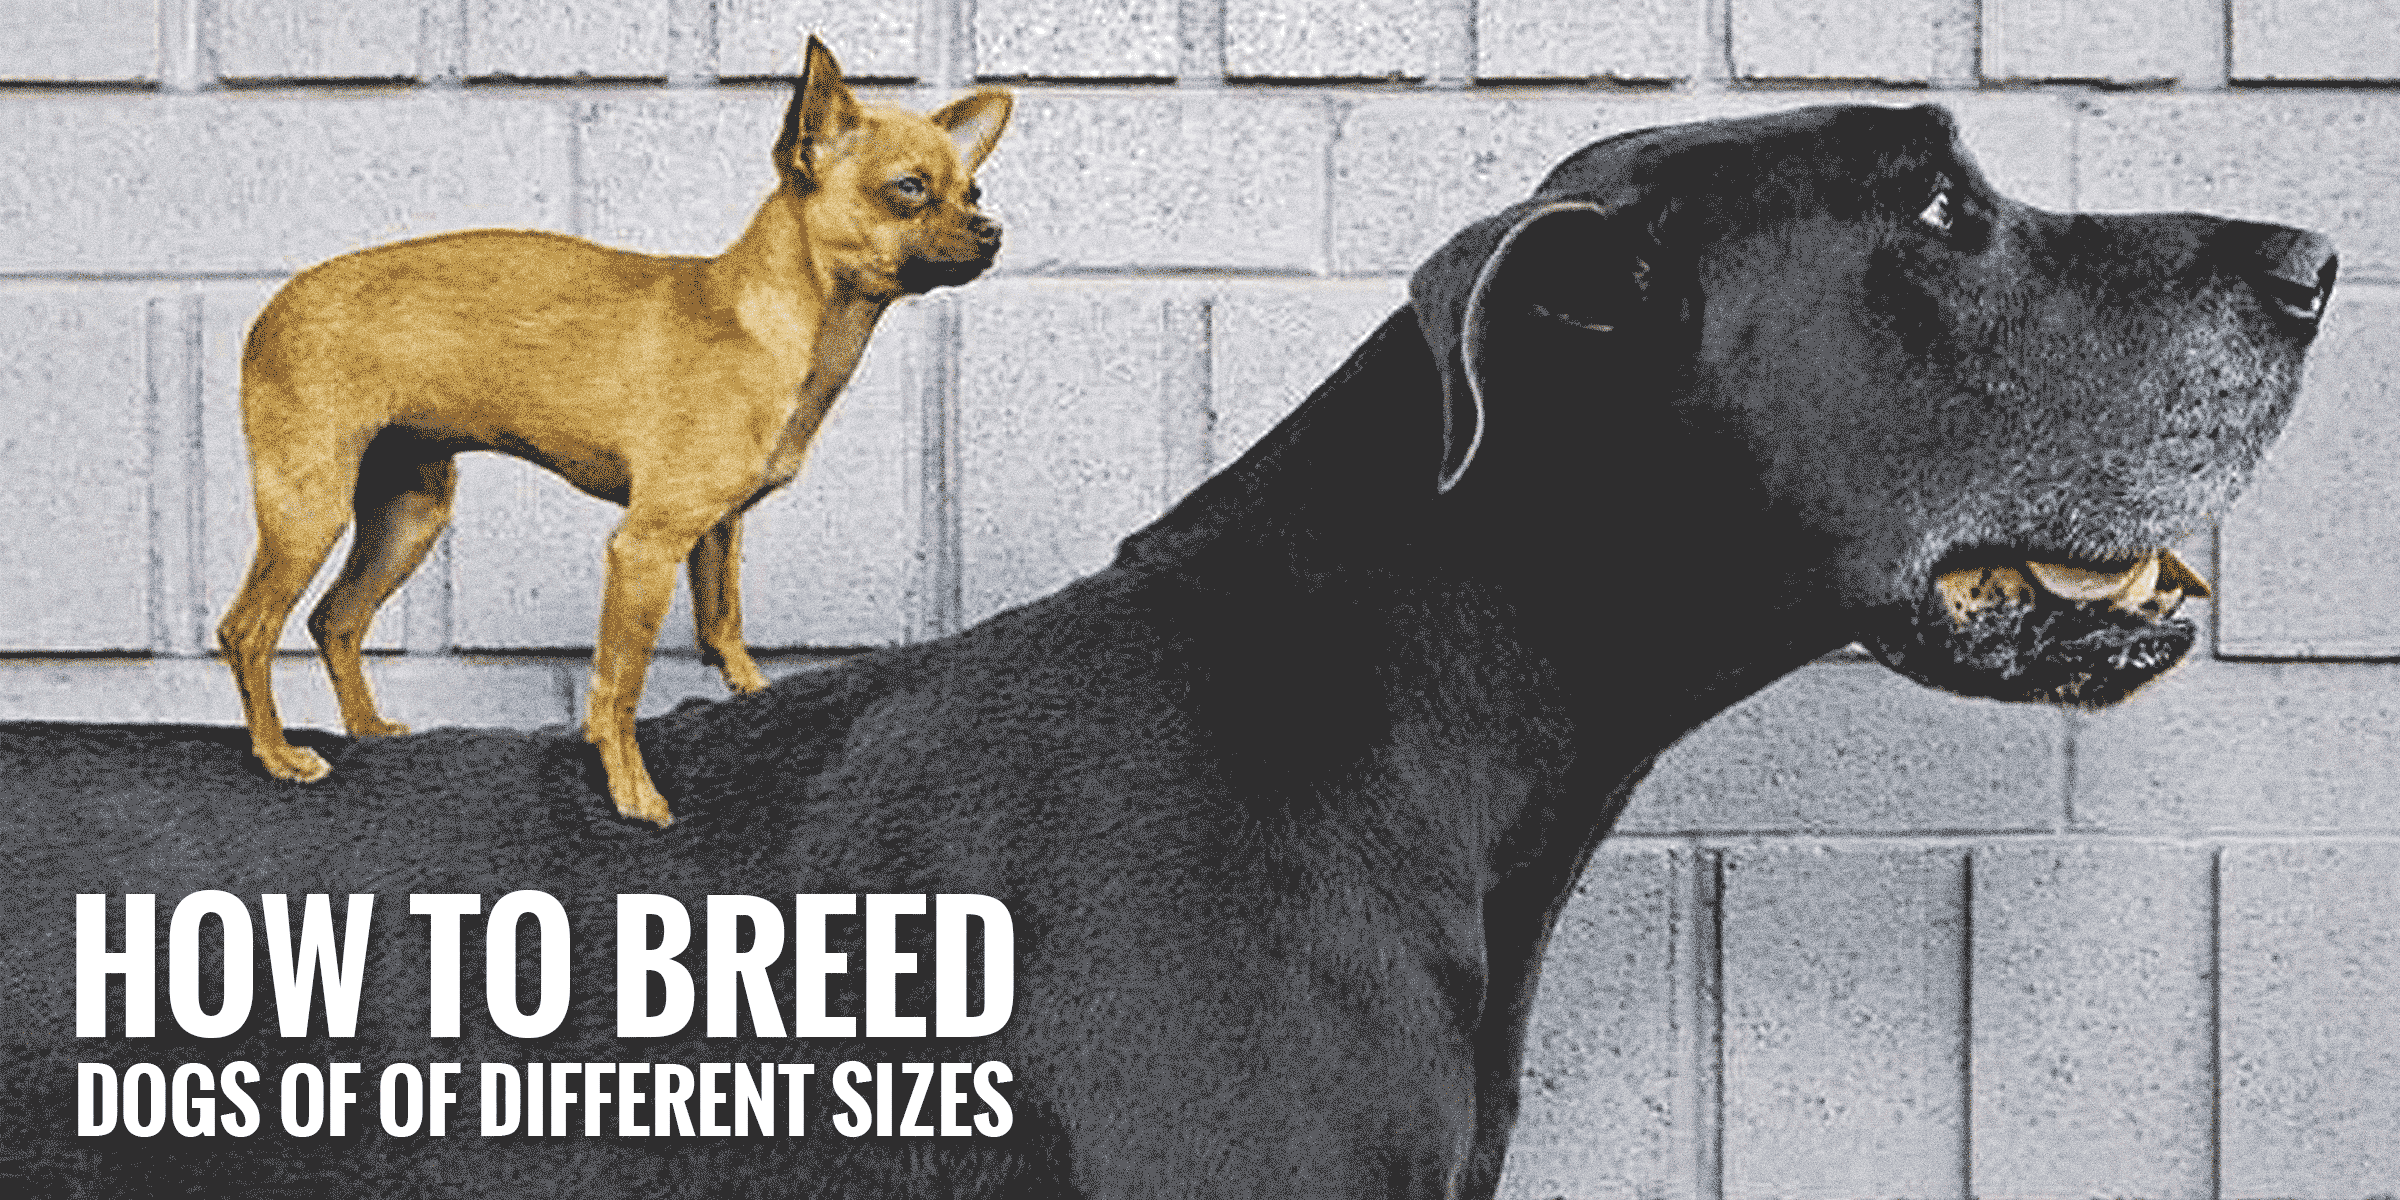 where to breed my dog